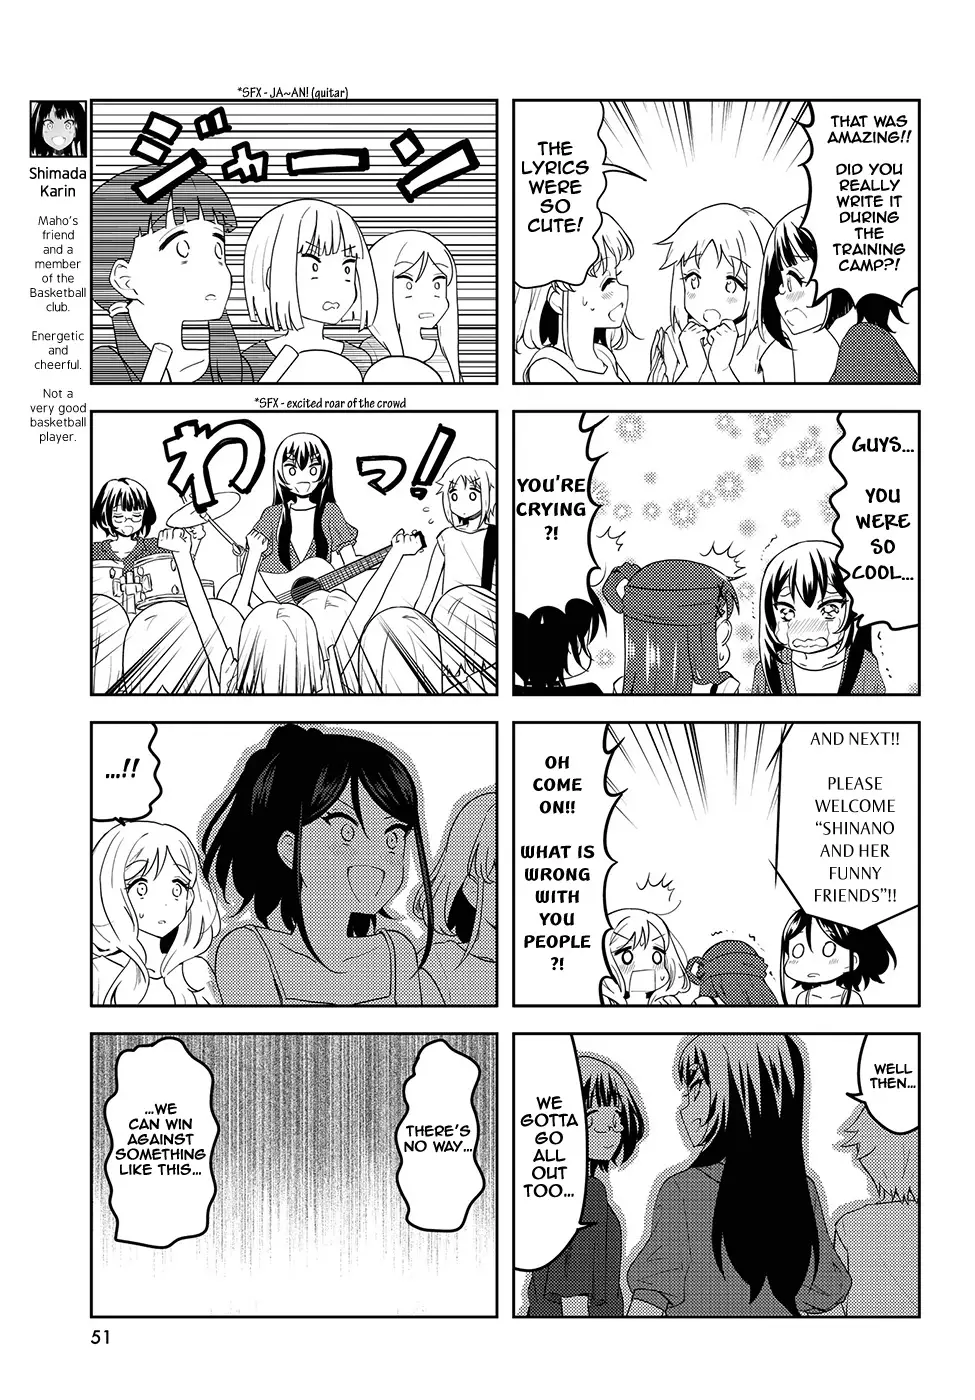 K-On! Shuffle - 37 page 5-832adc66